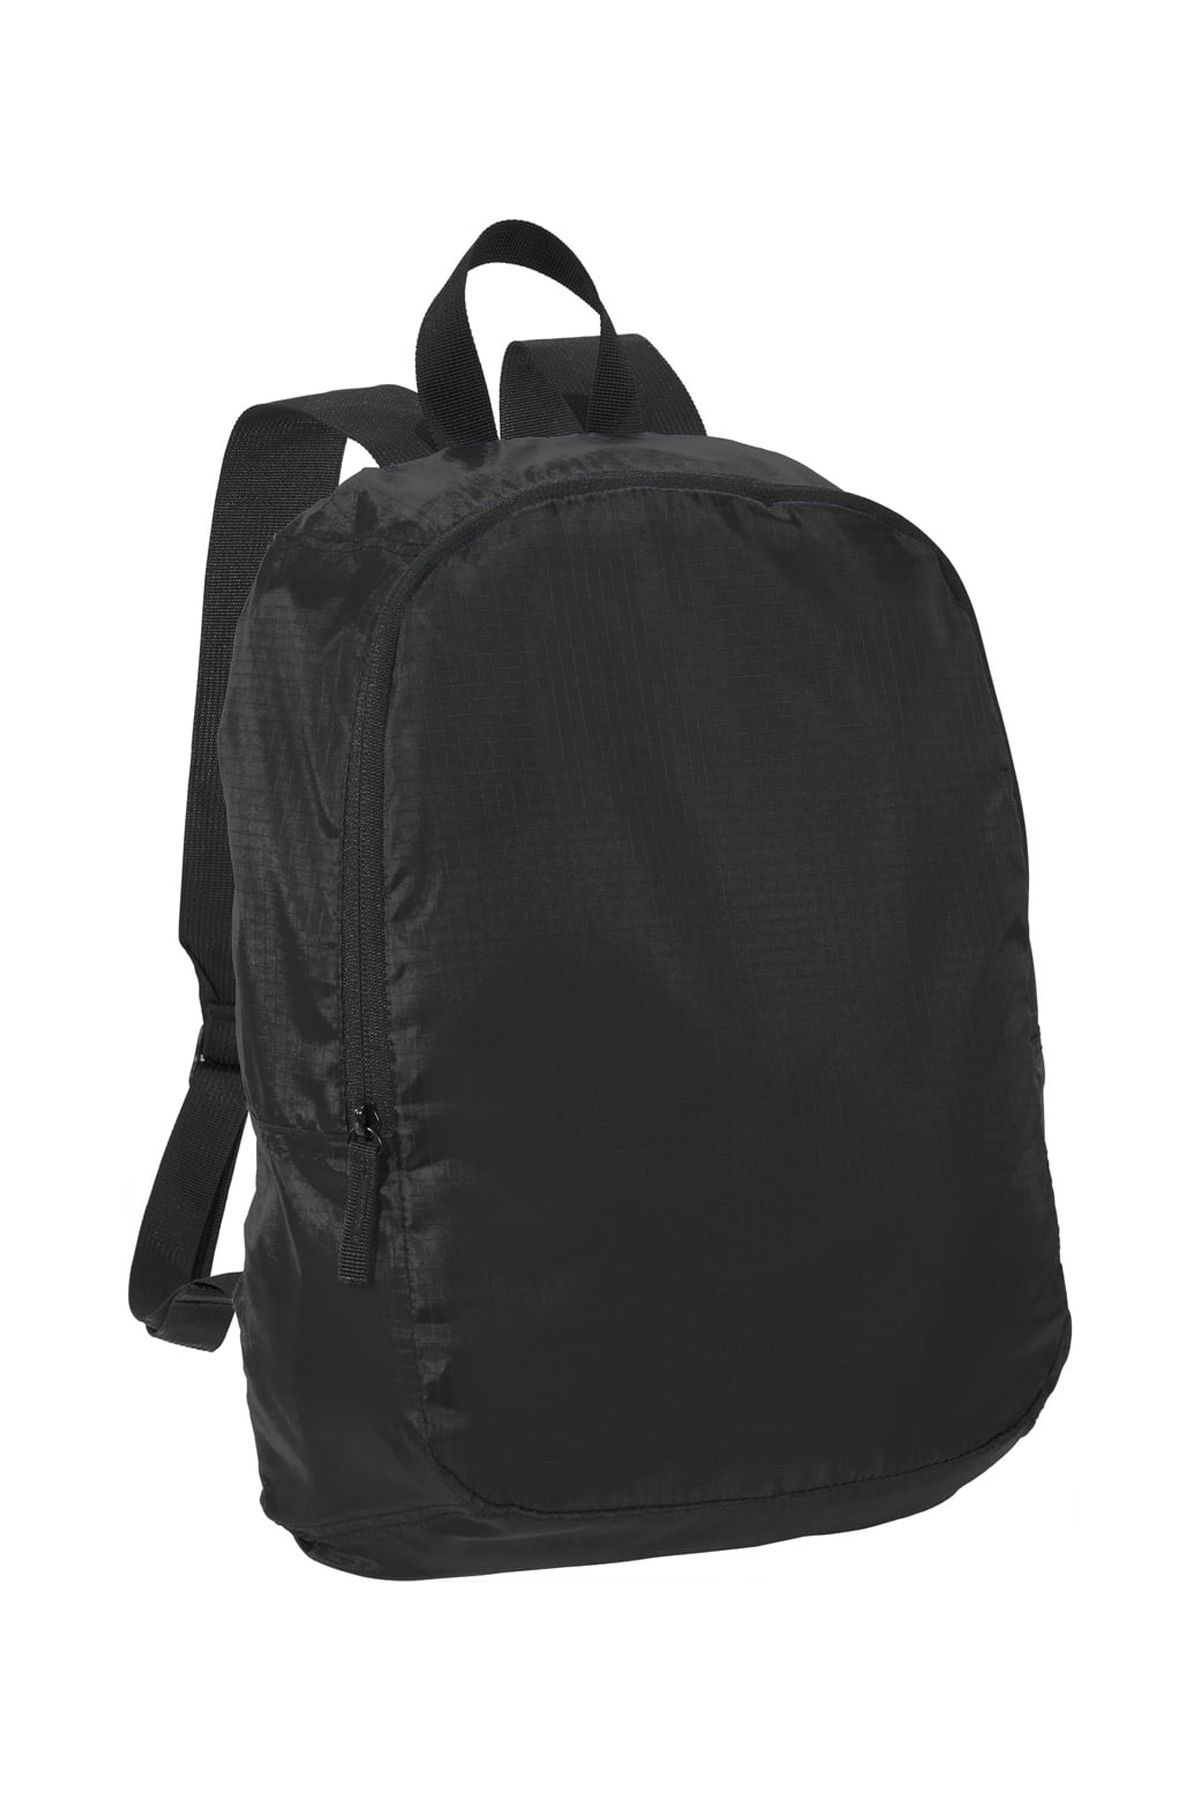 Port Authority Adult Unisex Plain Backpack Black One Size Fits All - image 1 of 2